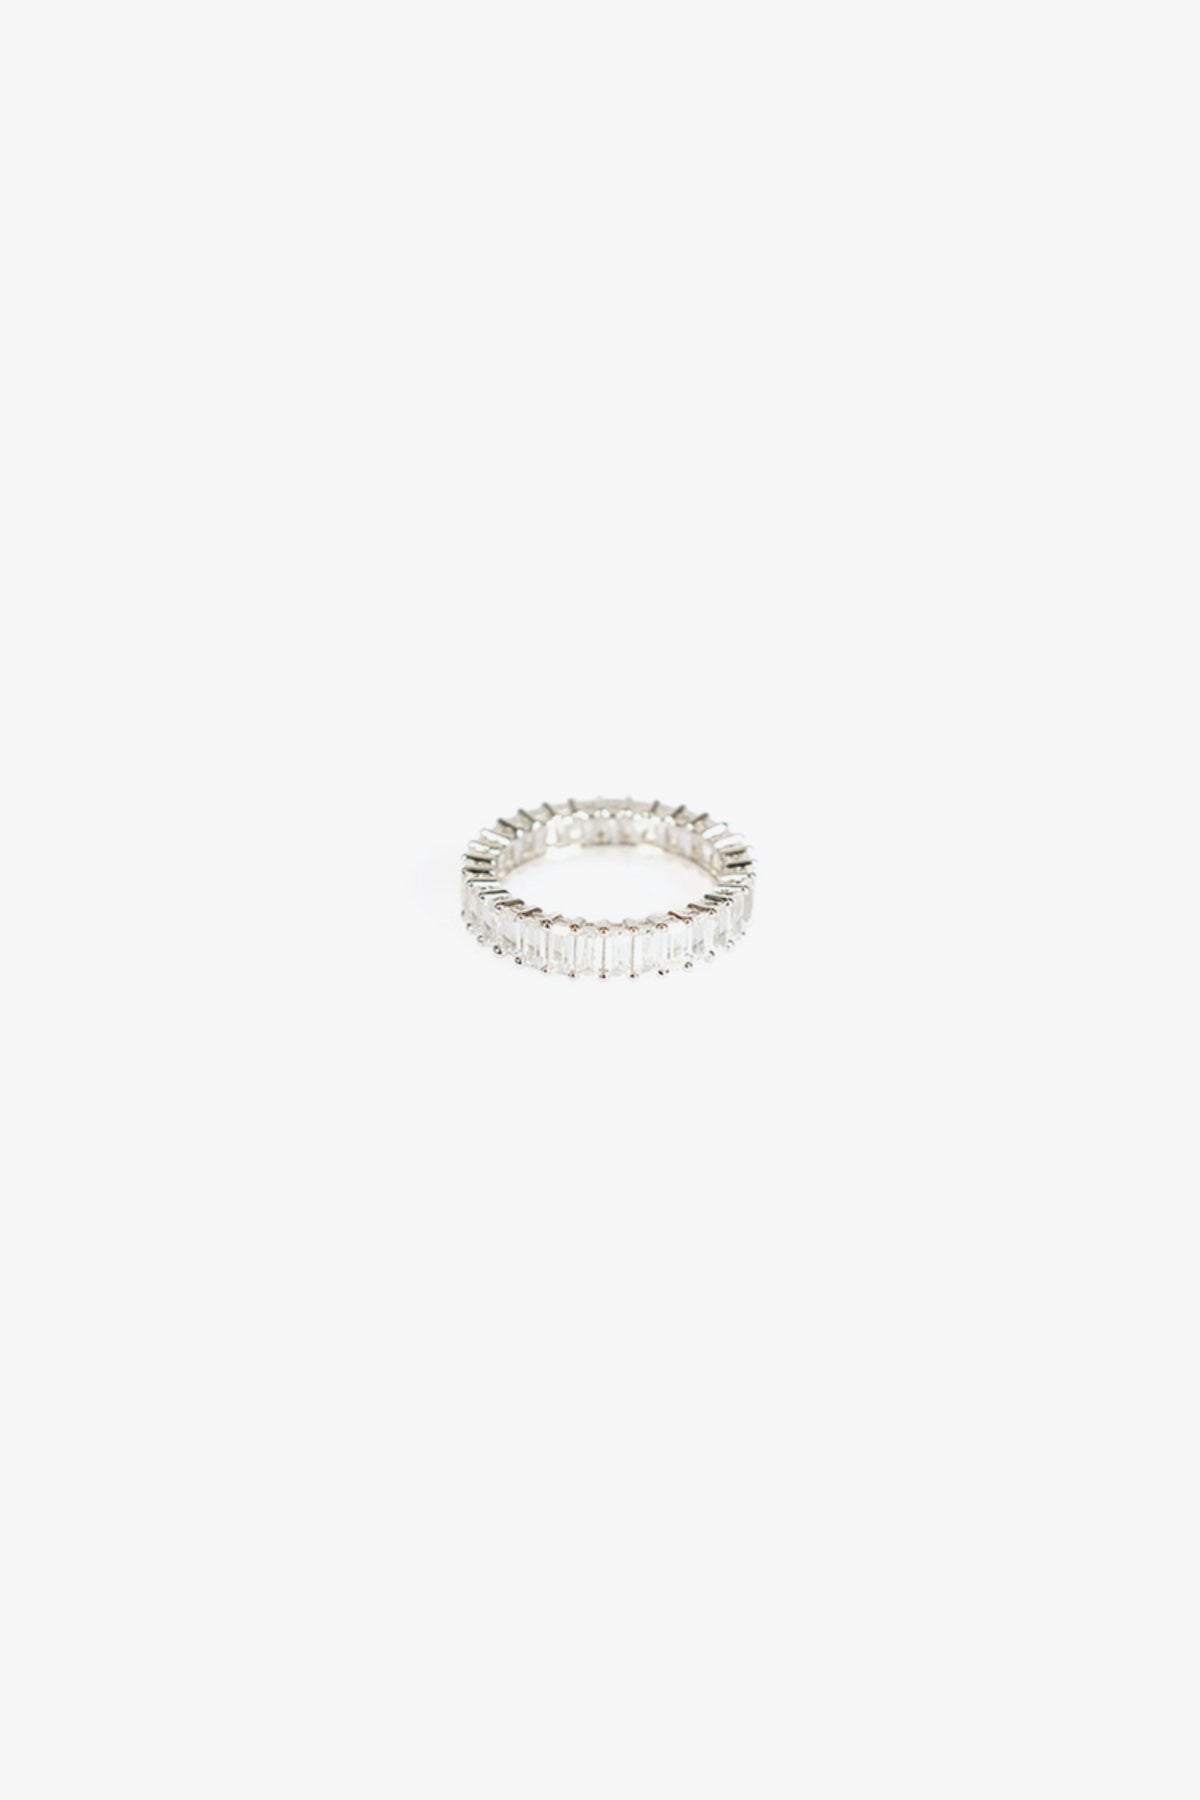 YOUR BAGGUETTE RING - CLEAR